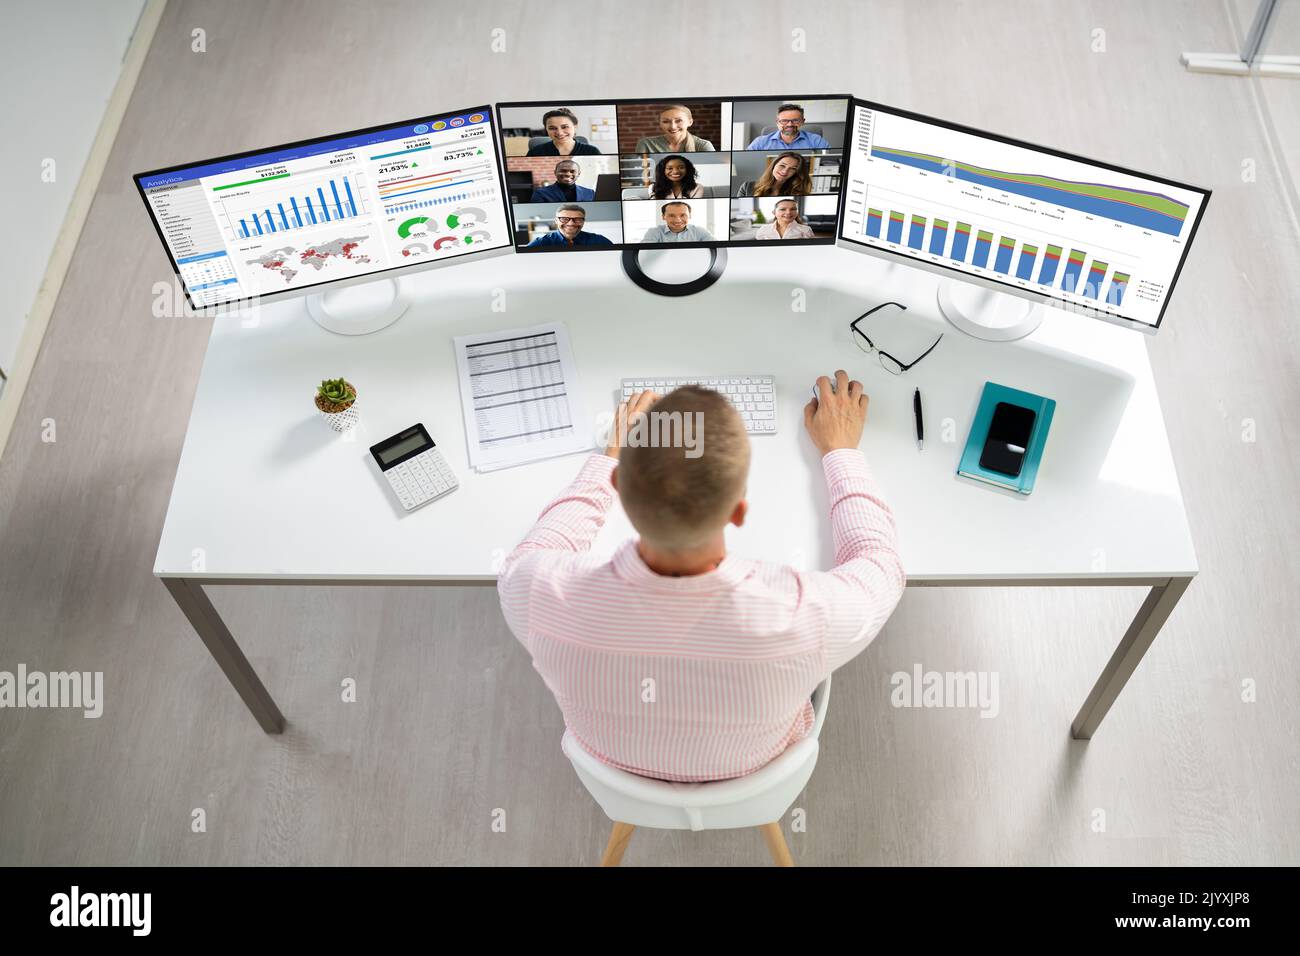 Watching Online Video Conference Learning Webinar Meeting Stock Photo